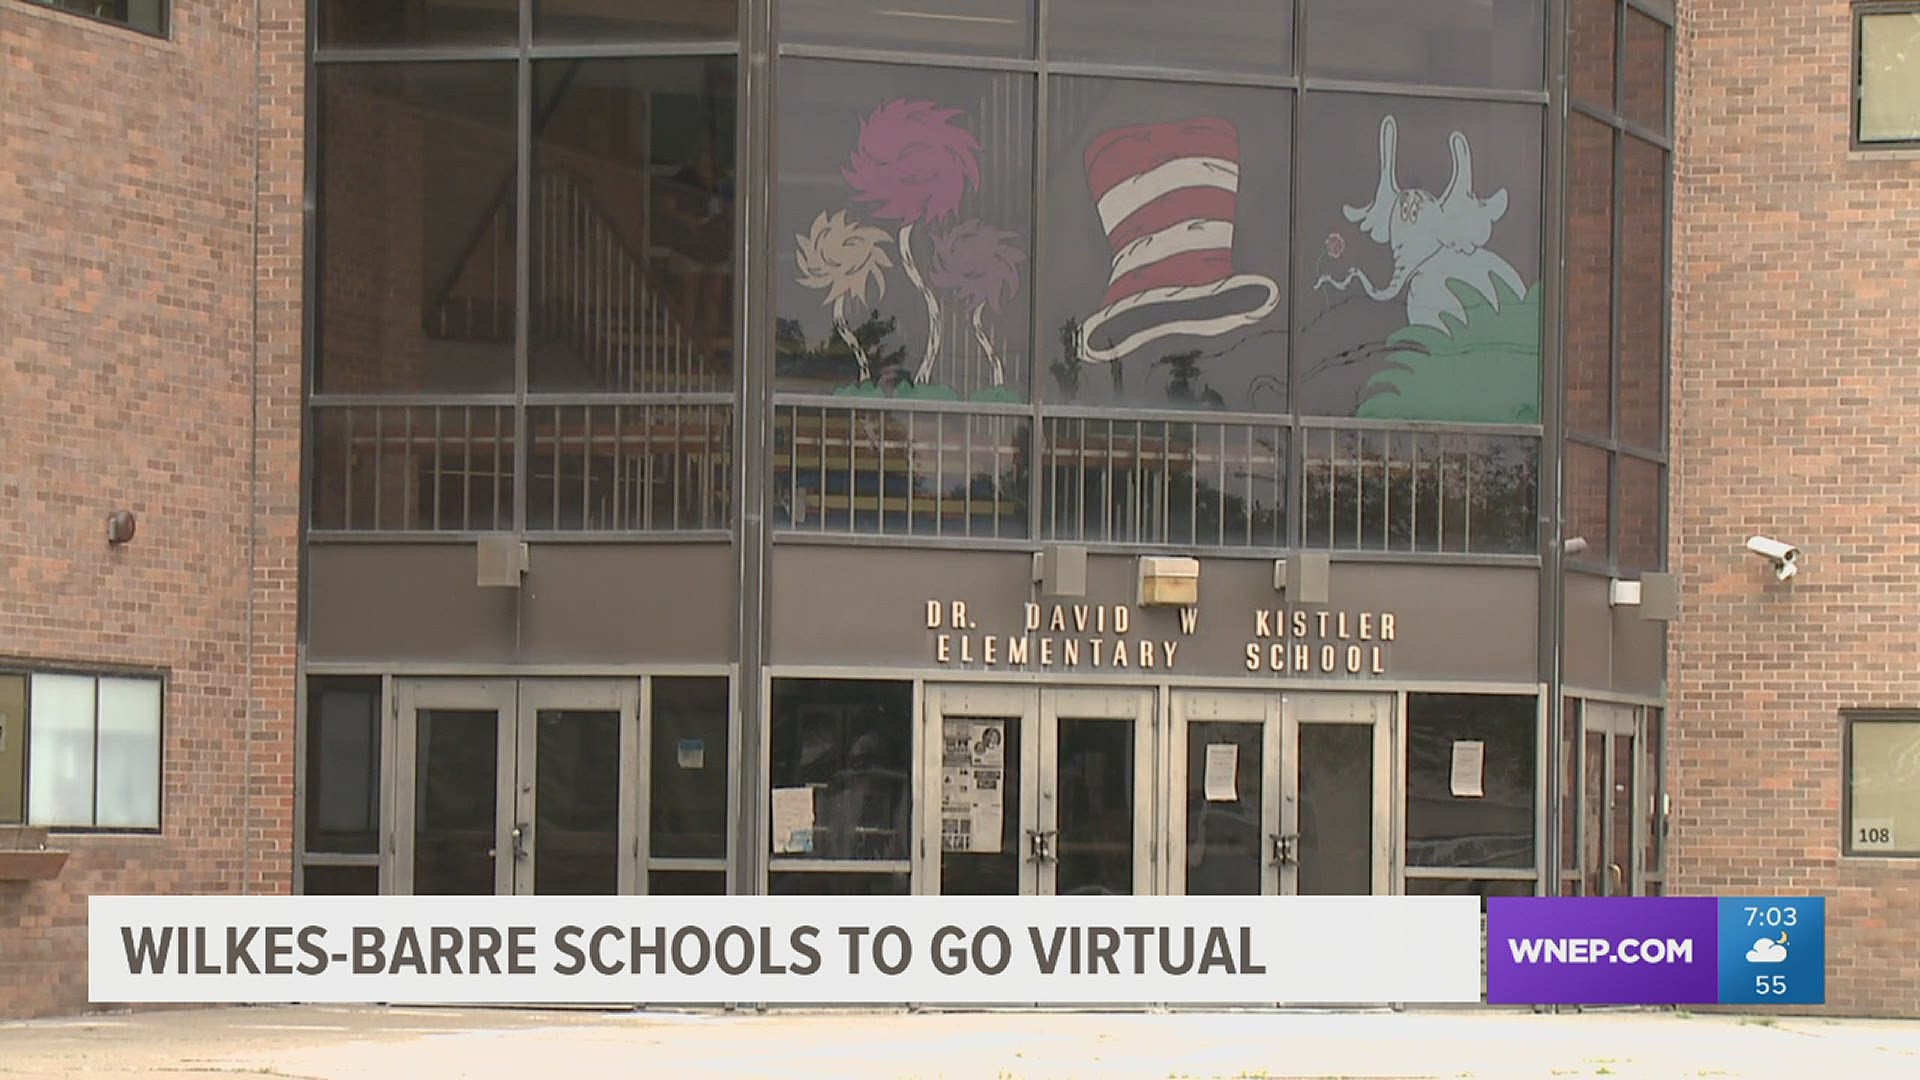 Wilkes-Barre Area School District Officials say there are multiple school buildings throughout the district that each have between two and four positive cases.